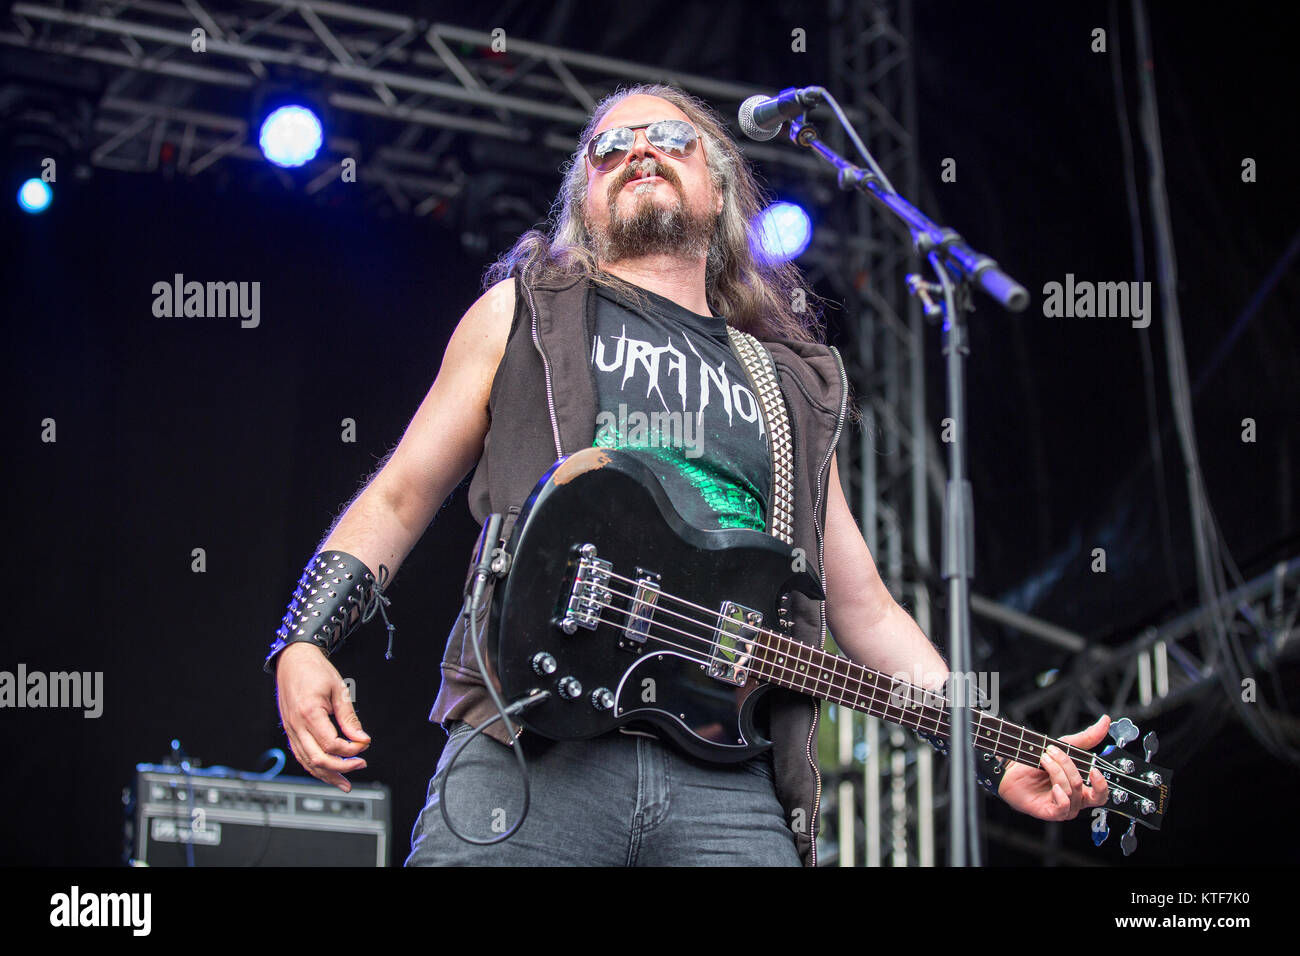 Norway, Borre – August 19, 2017. The Norwegian black metal band Aura Noir performs a live concert at during the Norwegian metal festival Midgardsblot Festival 2017 in Borre. Here vocalist and bassist Aggressor is seen live on stage. Stock Photo